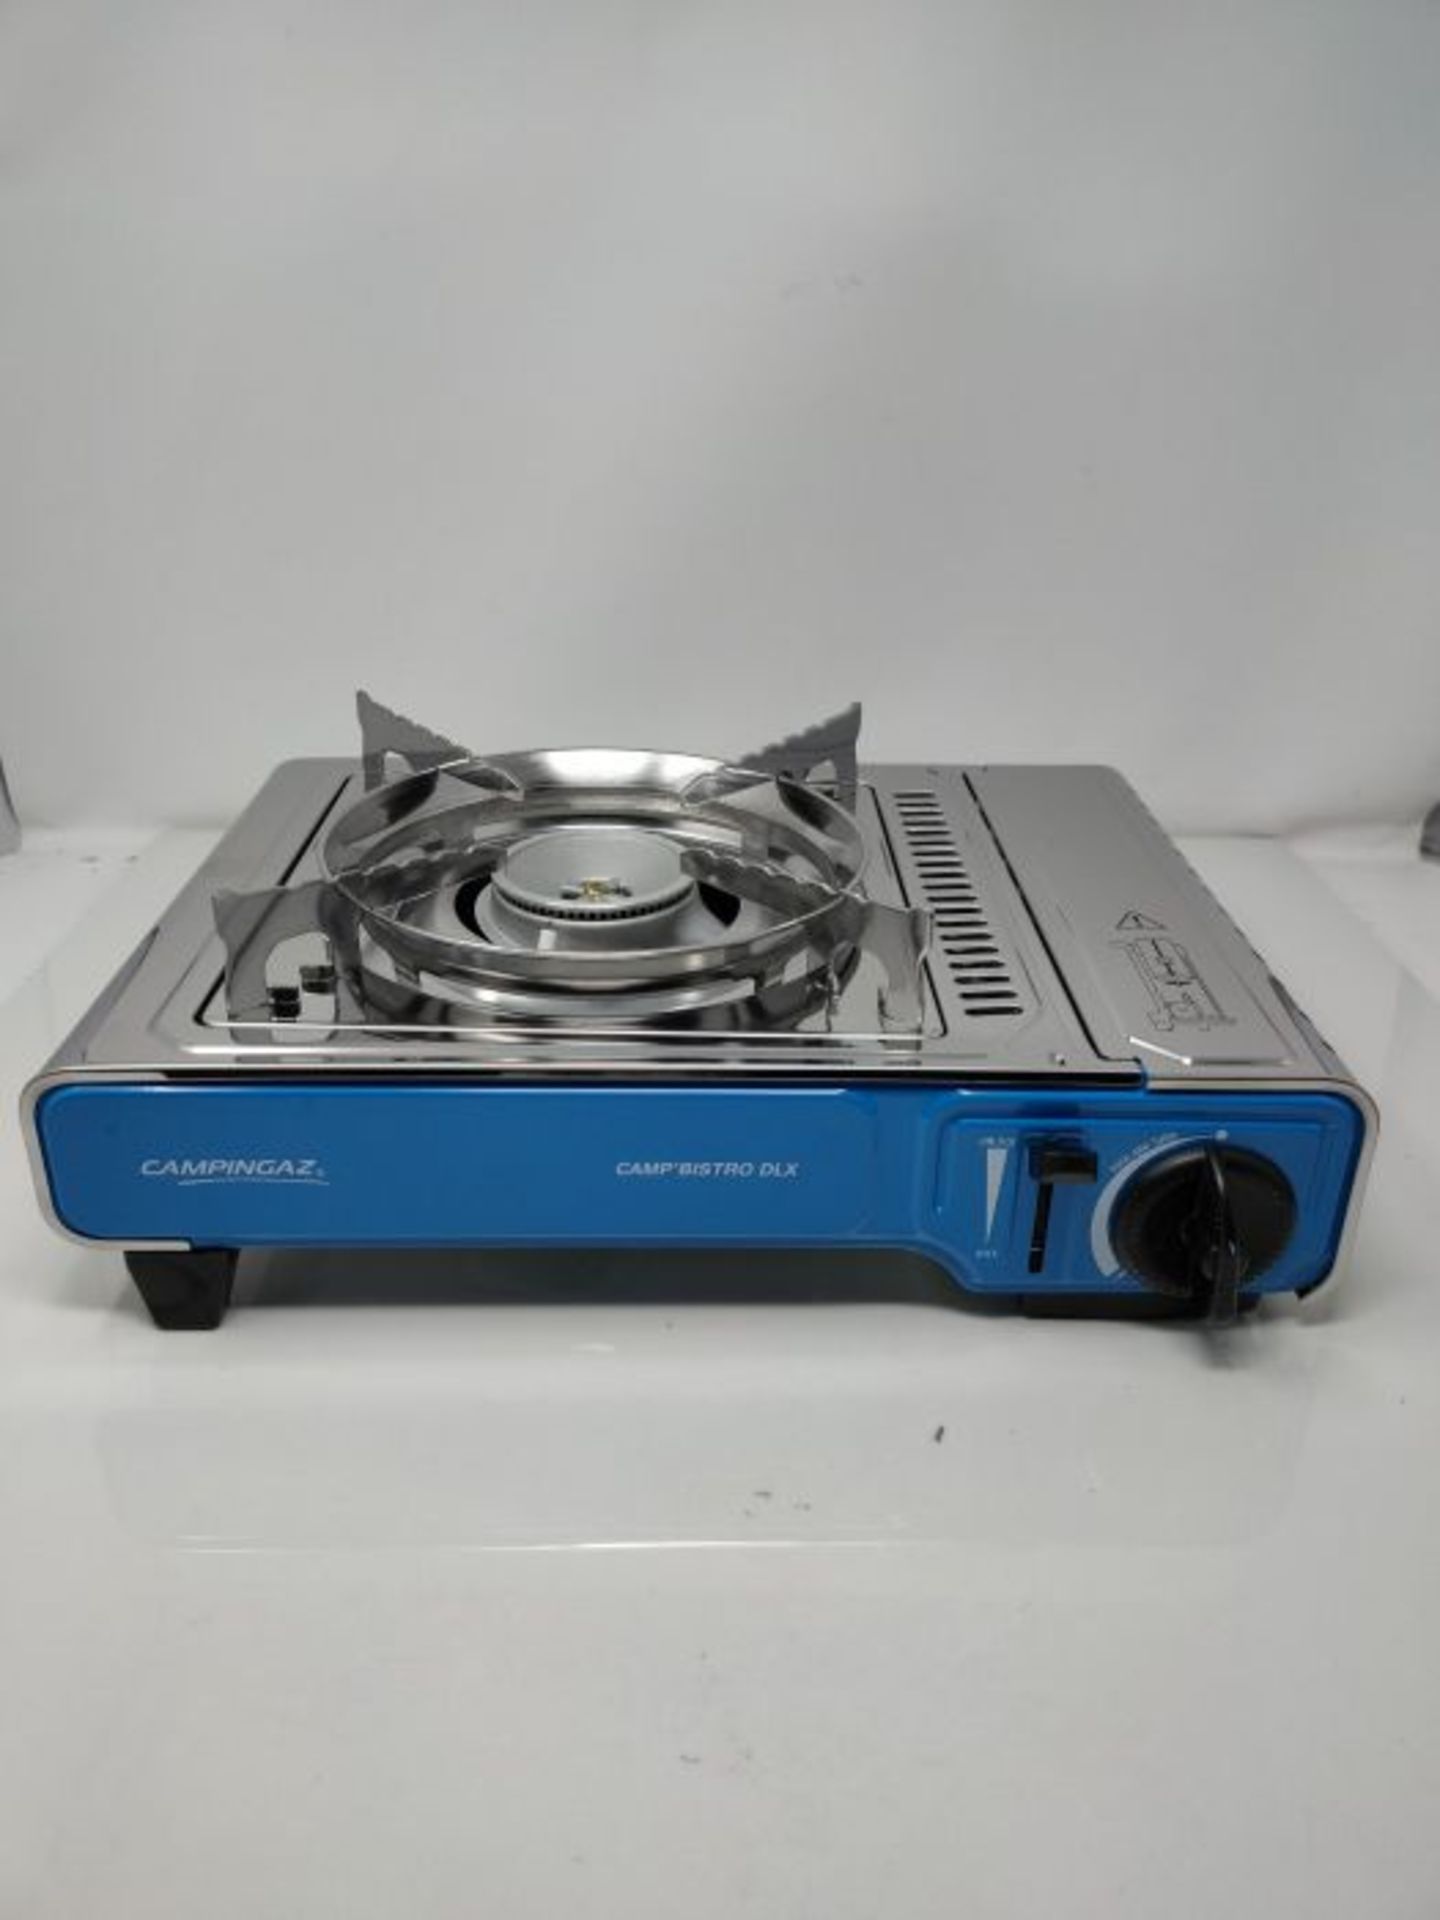 Campingaz Camp Bistro DLX Gas Stove Compact Camping Stove with Piezo Ignition Cartridg - Image 3 of 3